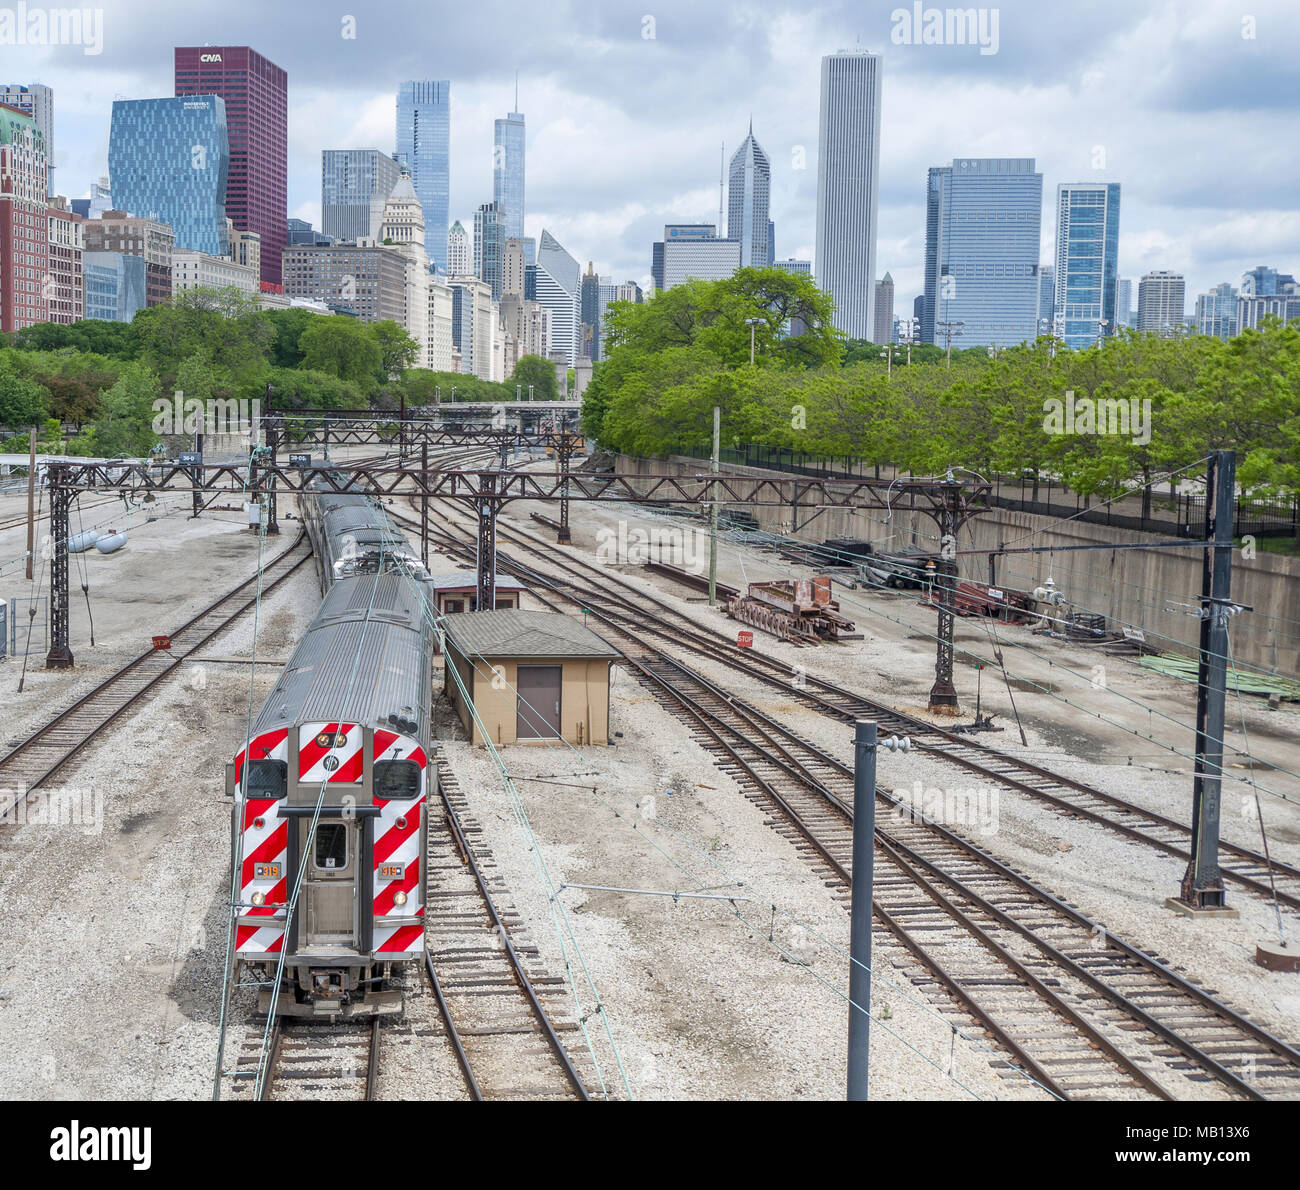 27 May 2016 - Chicago, USA. Urban city railway environment. Modern skyscrapers of downtown Chicago in the background. Stock Photo